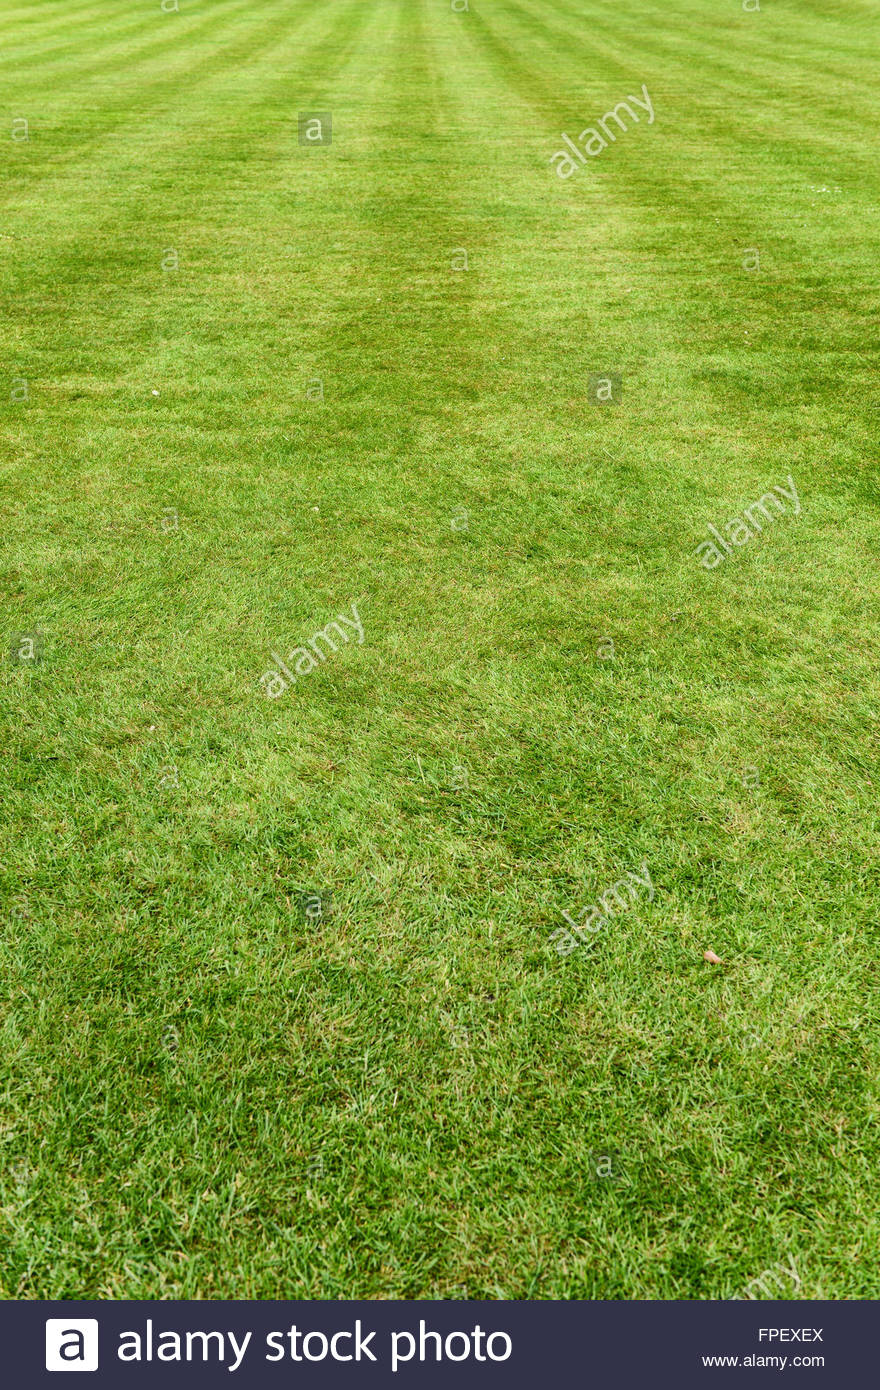 Neat Manicured Green Turf Lawn Or Grass Background With Mowing